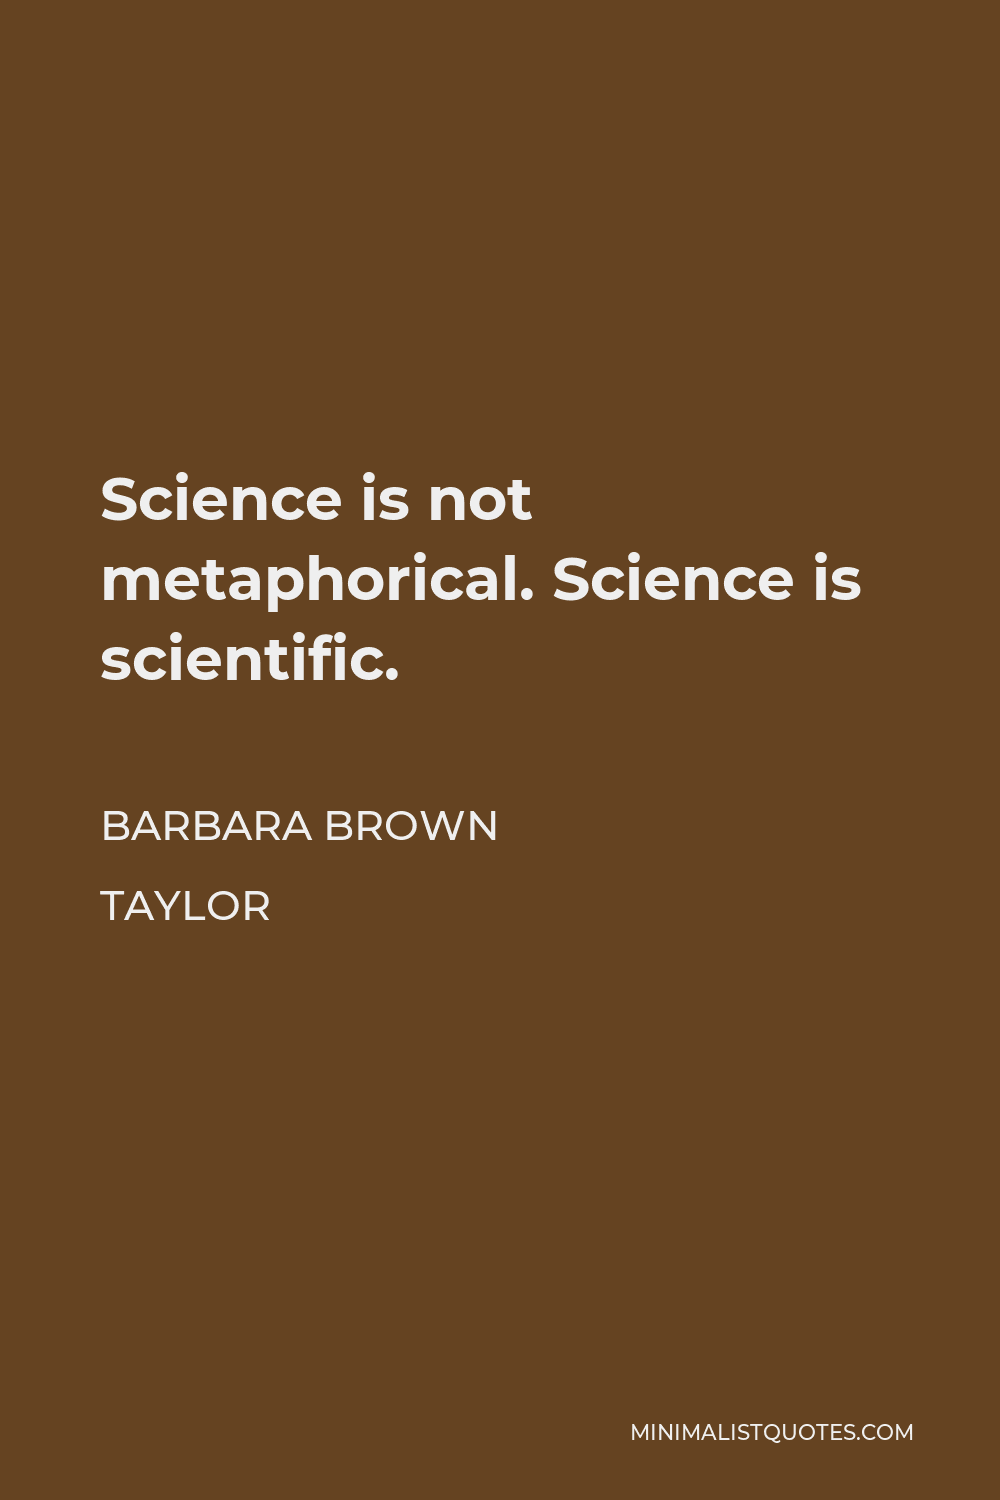 Barbara Brown Taylor Quote - Science is not metaphorical. Science is scientific.